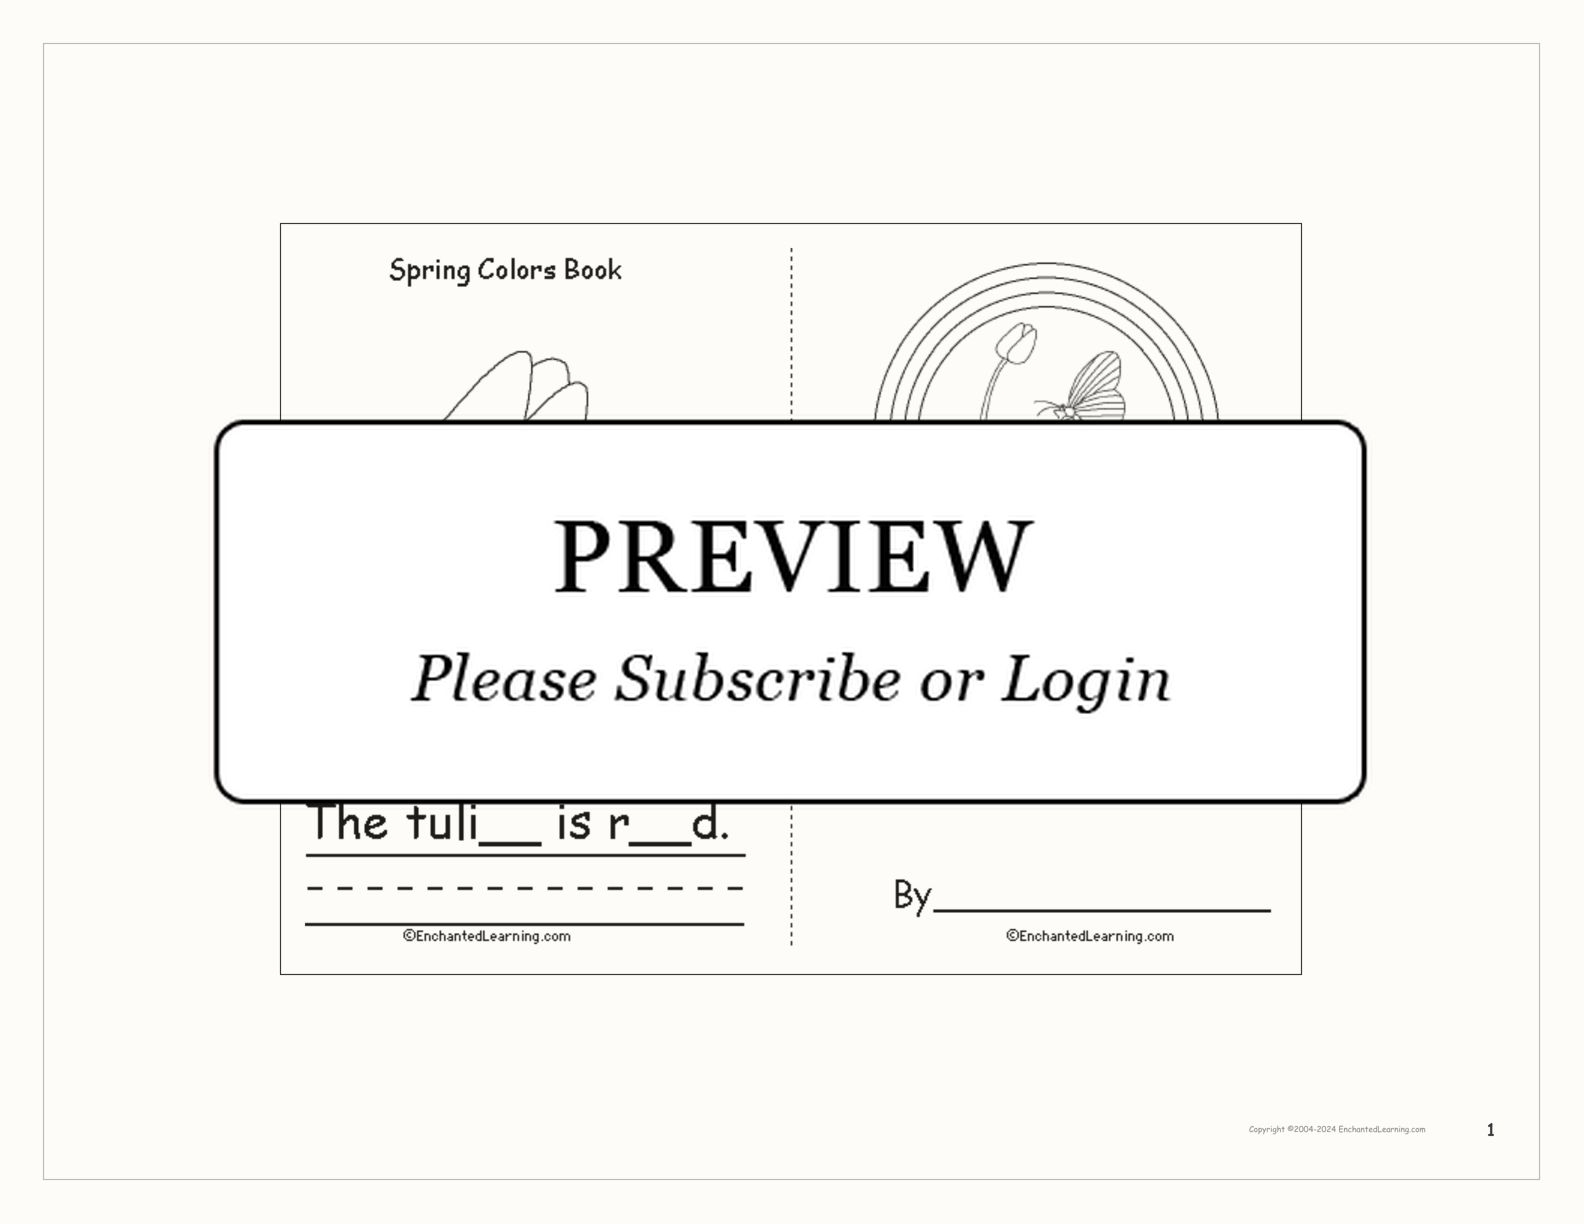 Spring Colors Book interactive worksheet page 1